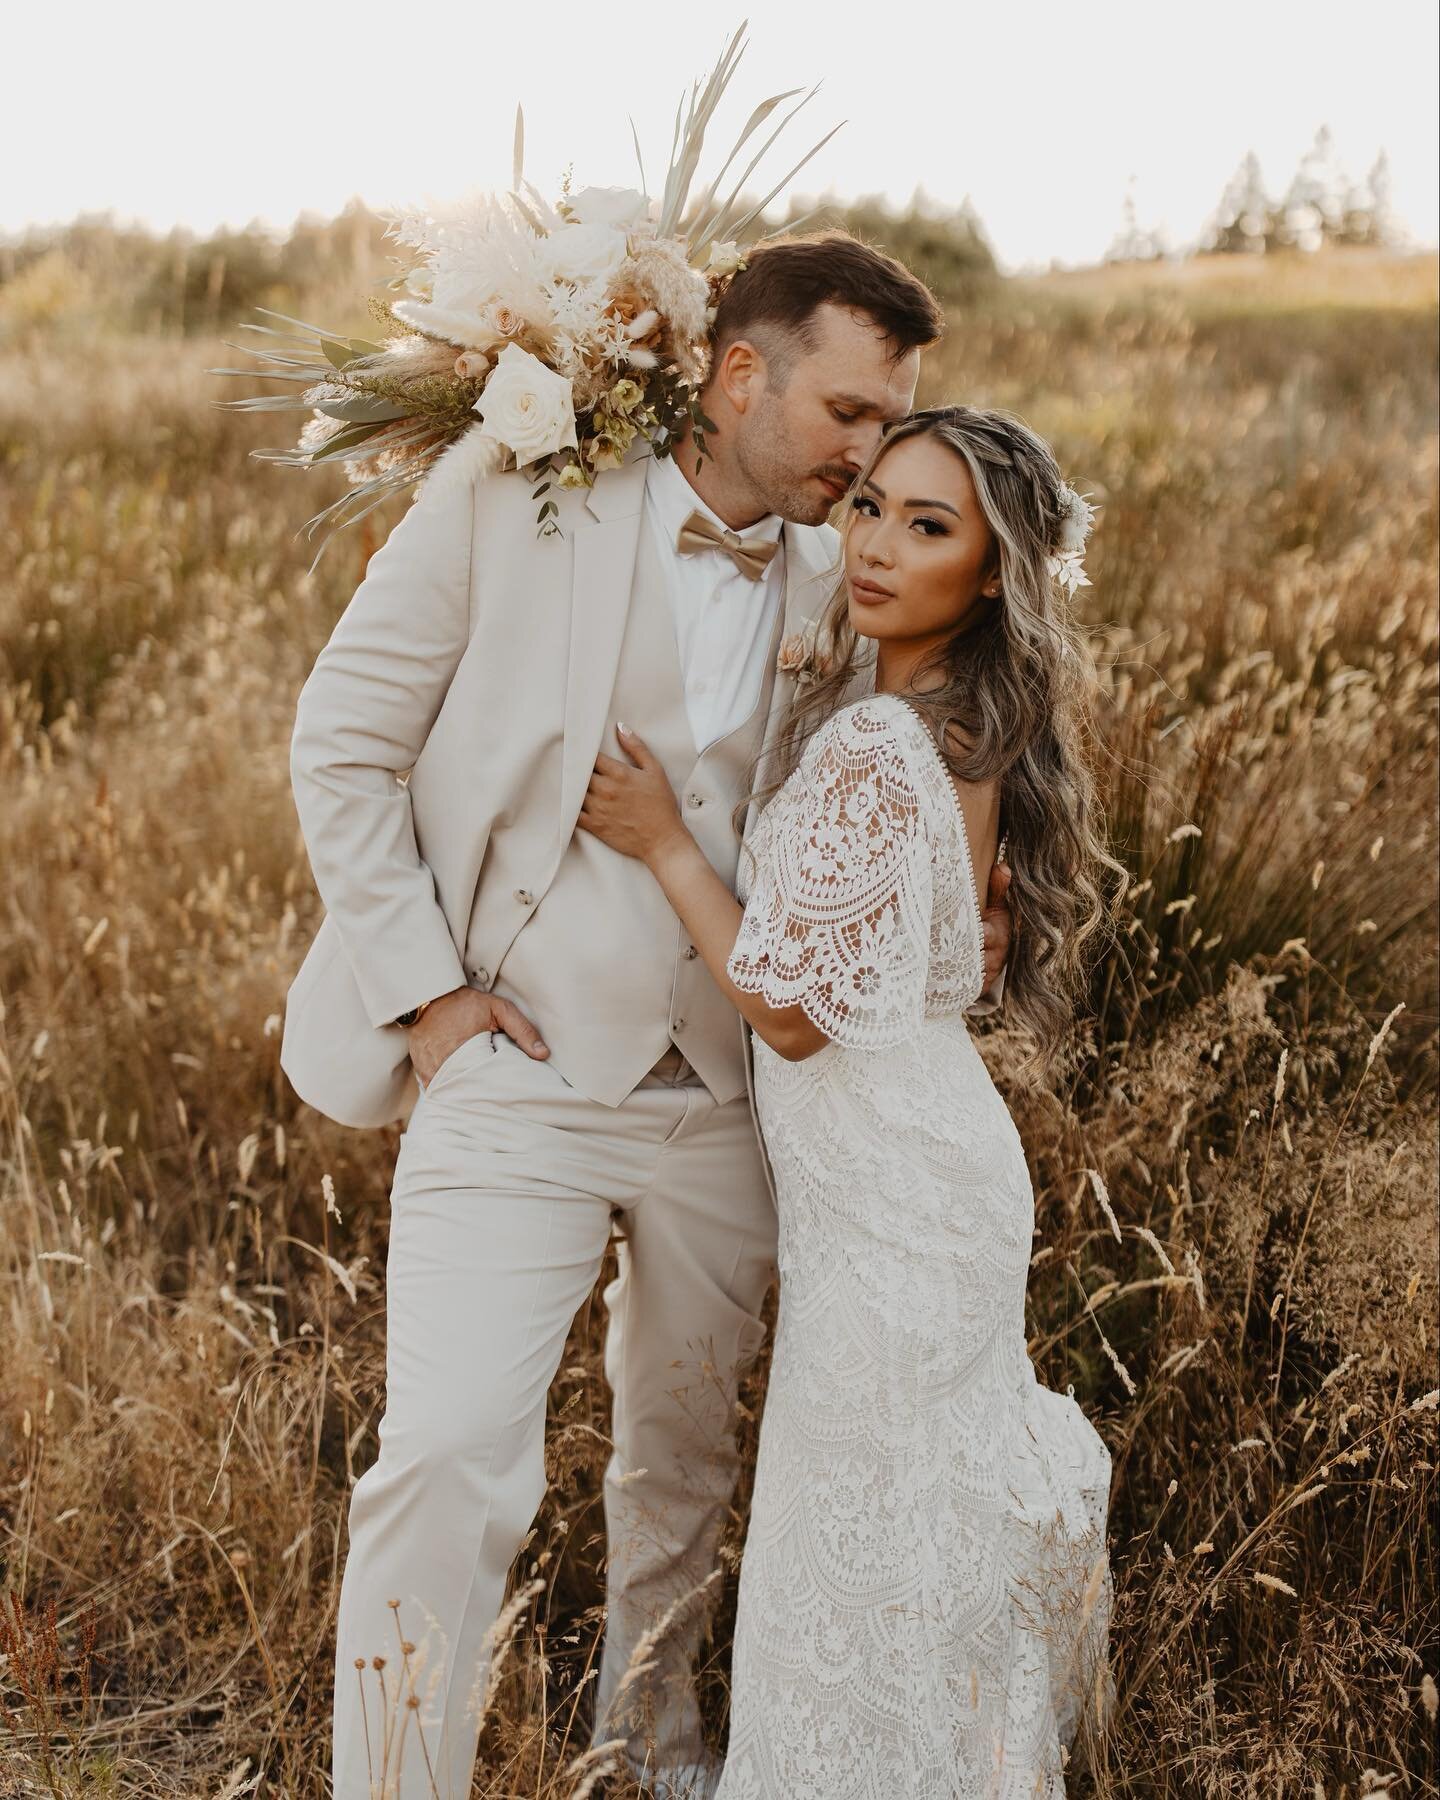 Realene &amp; Matt&rsquo;s wedding was a collection of golden fields and  flowing fabrics, their love overshadowing even the most exquisite details. Congratulations to you both! 🔥❤️💍 .
.
.
.
.
.
#seattleweddingphotography #seattlewedding #weddingvi